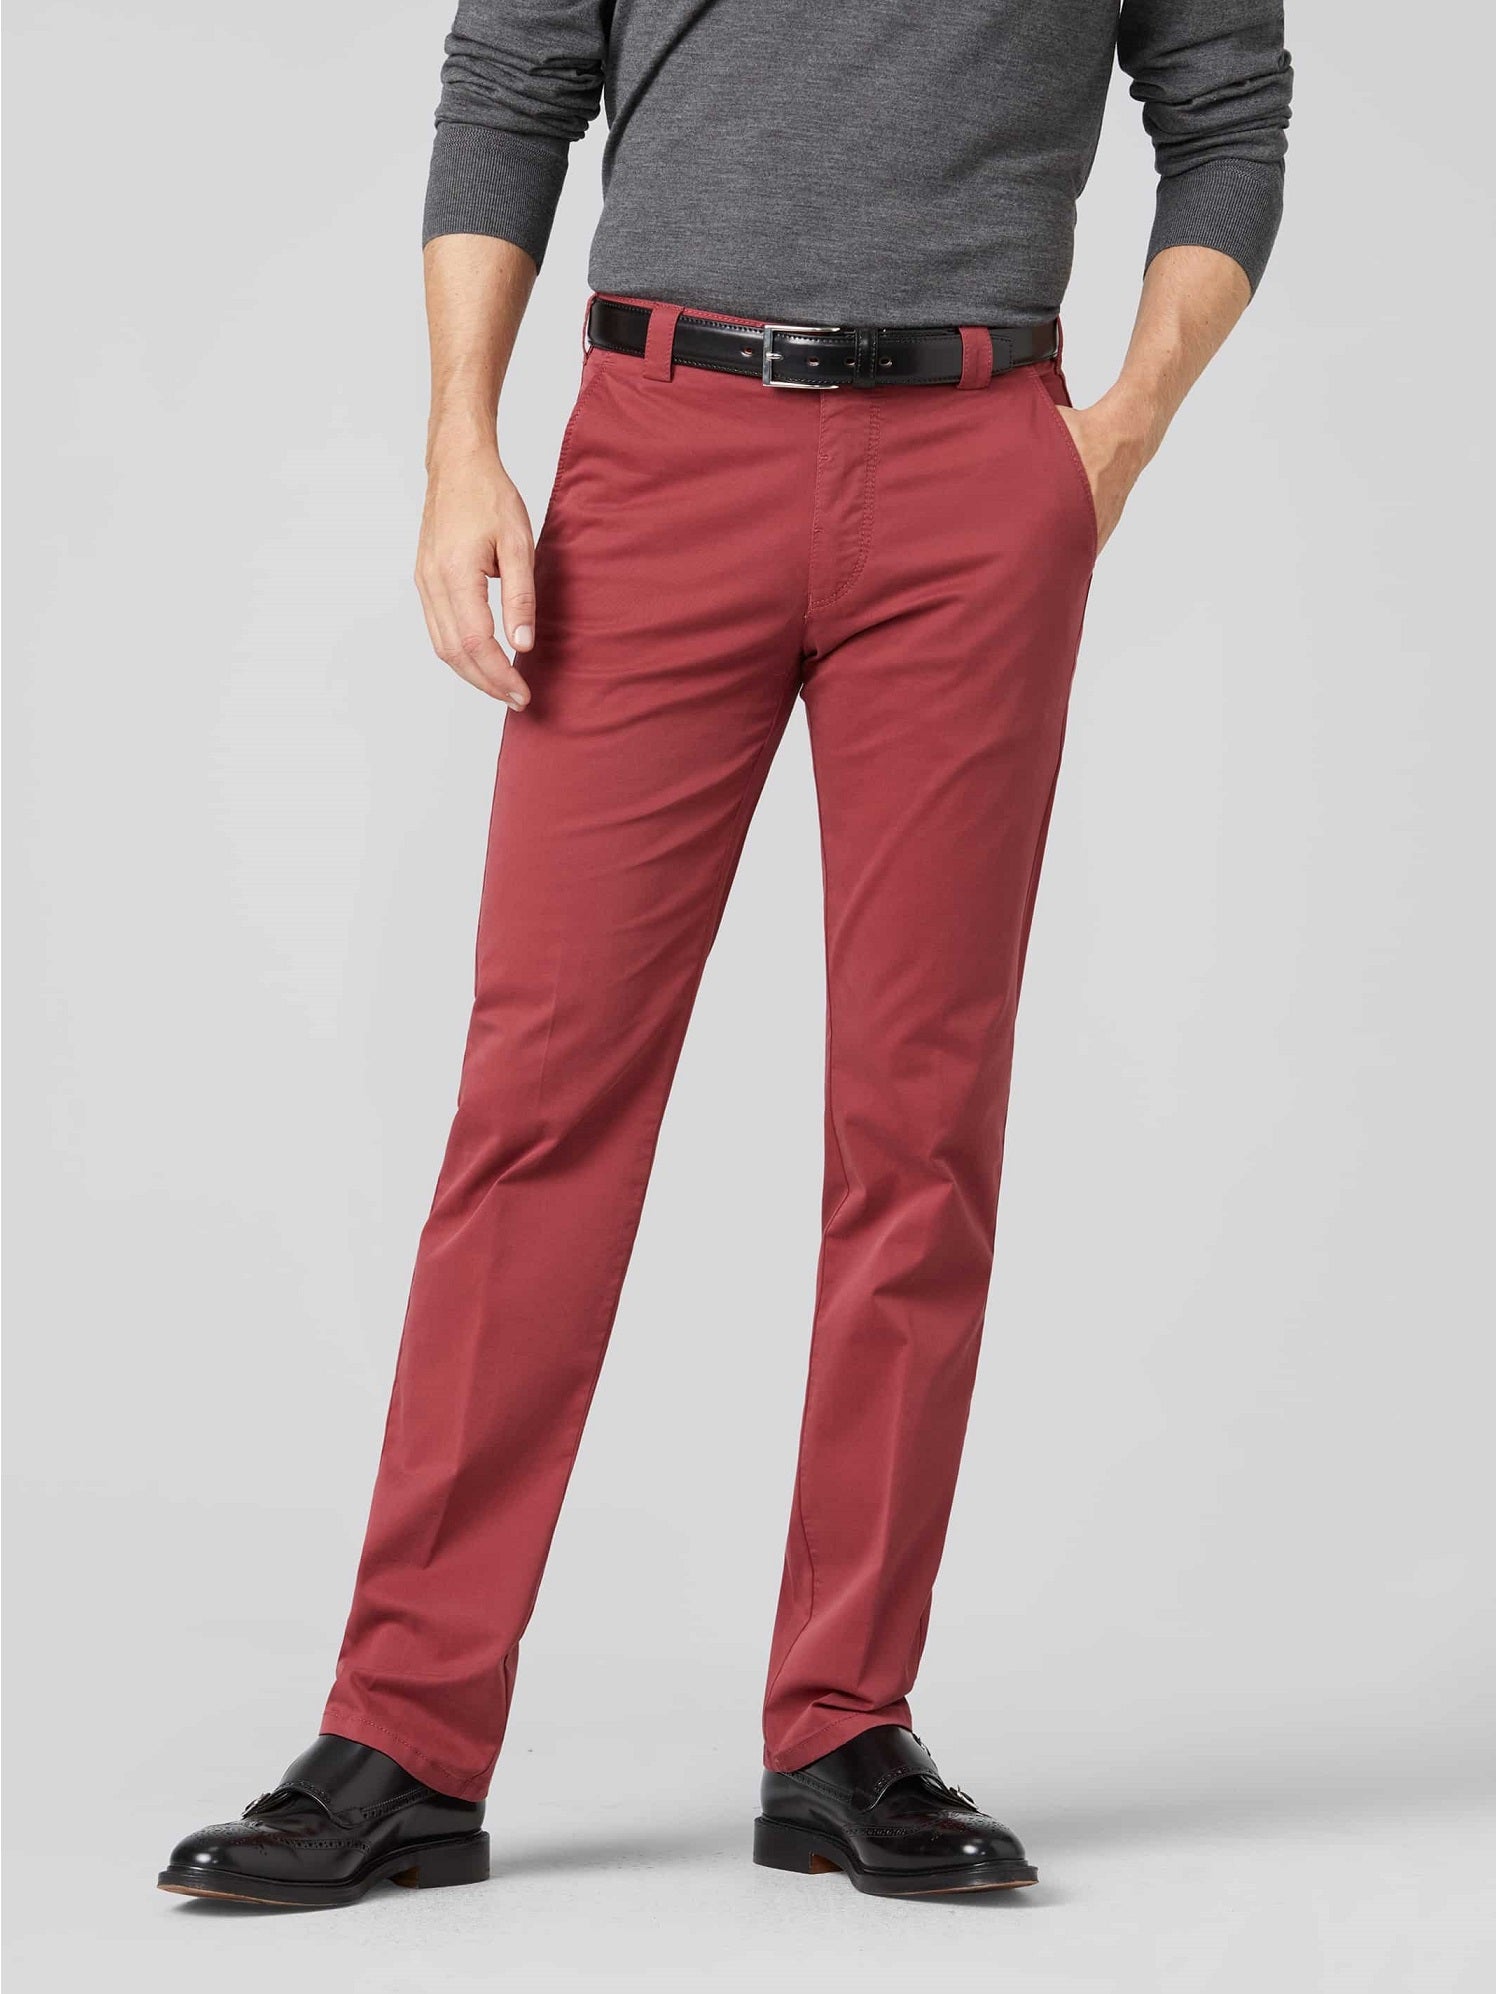 MEYER Roma Trousers - 3001 Light-Weight Cotton Chinos - Red